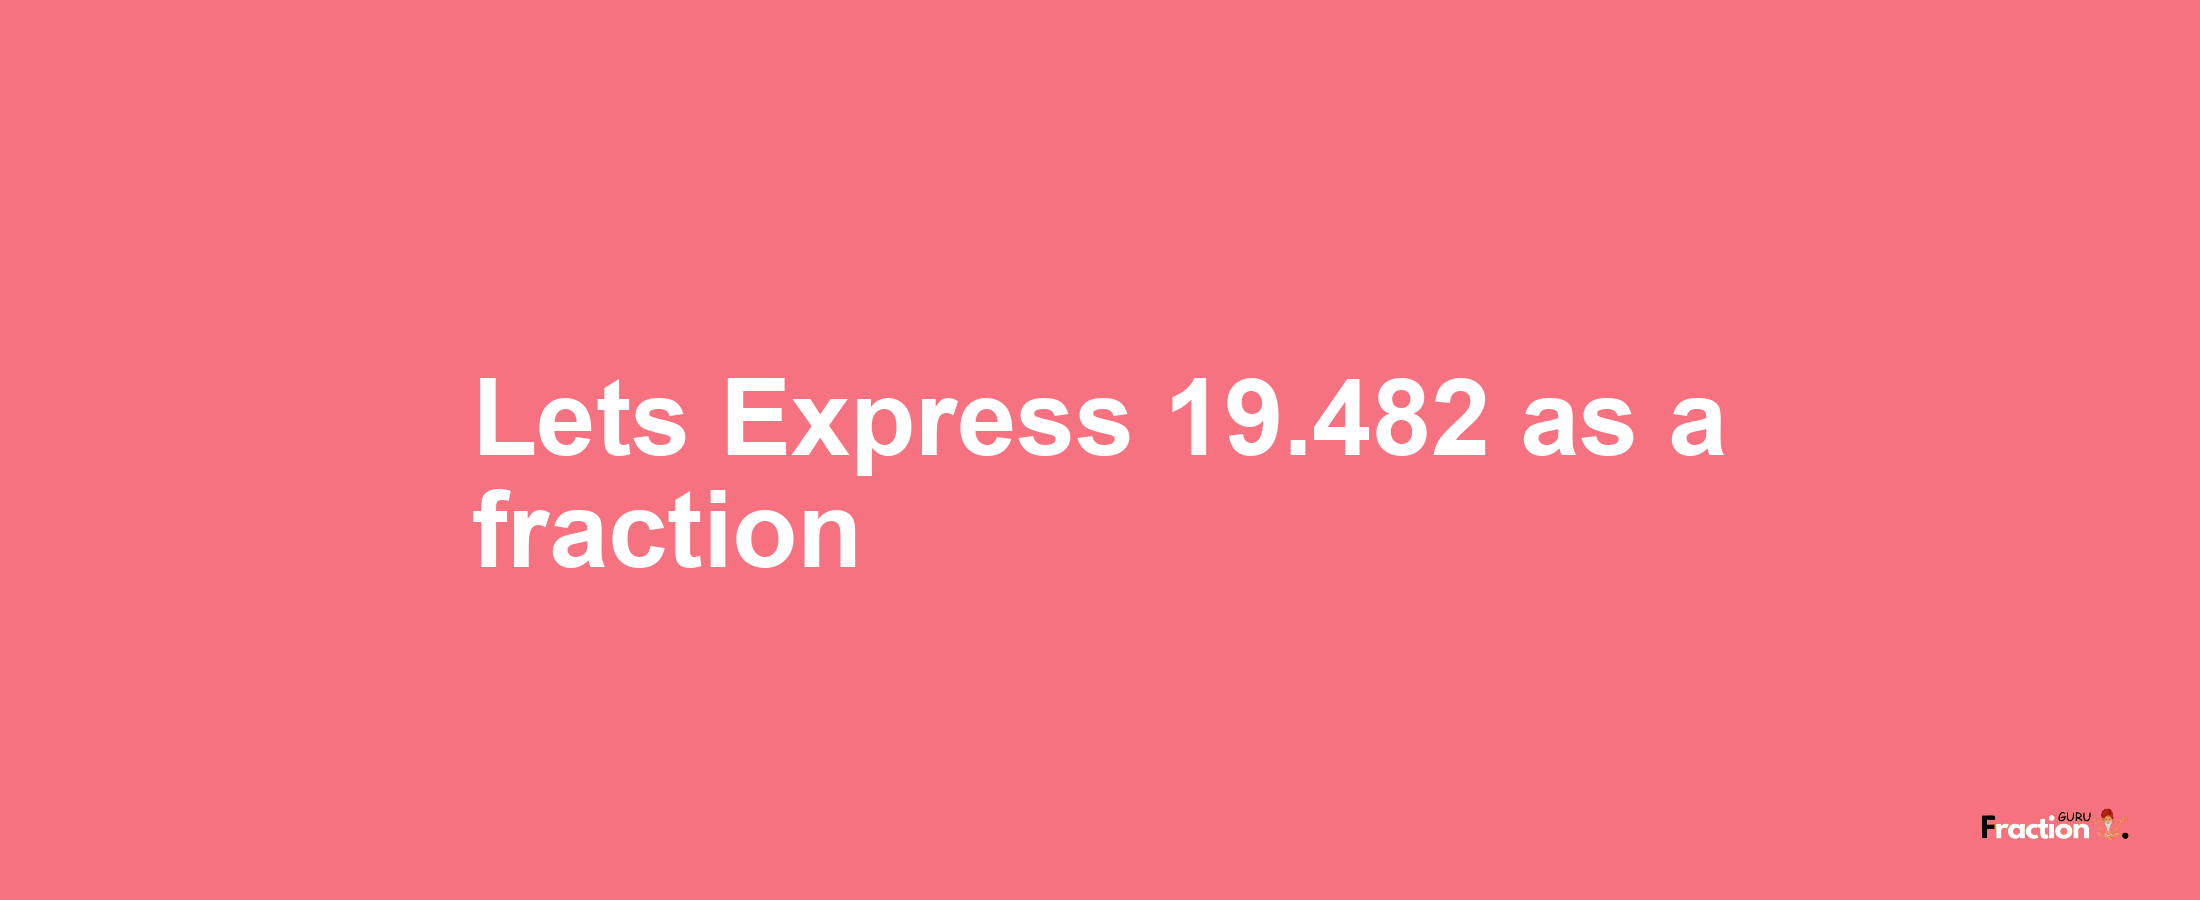 Lets Express 19.482 as afraction